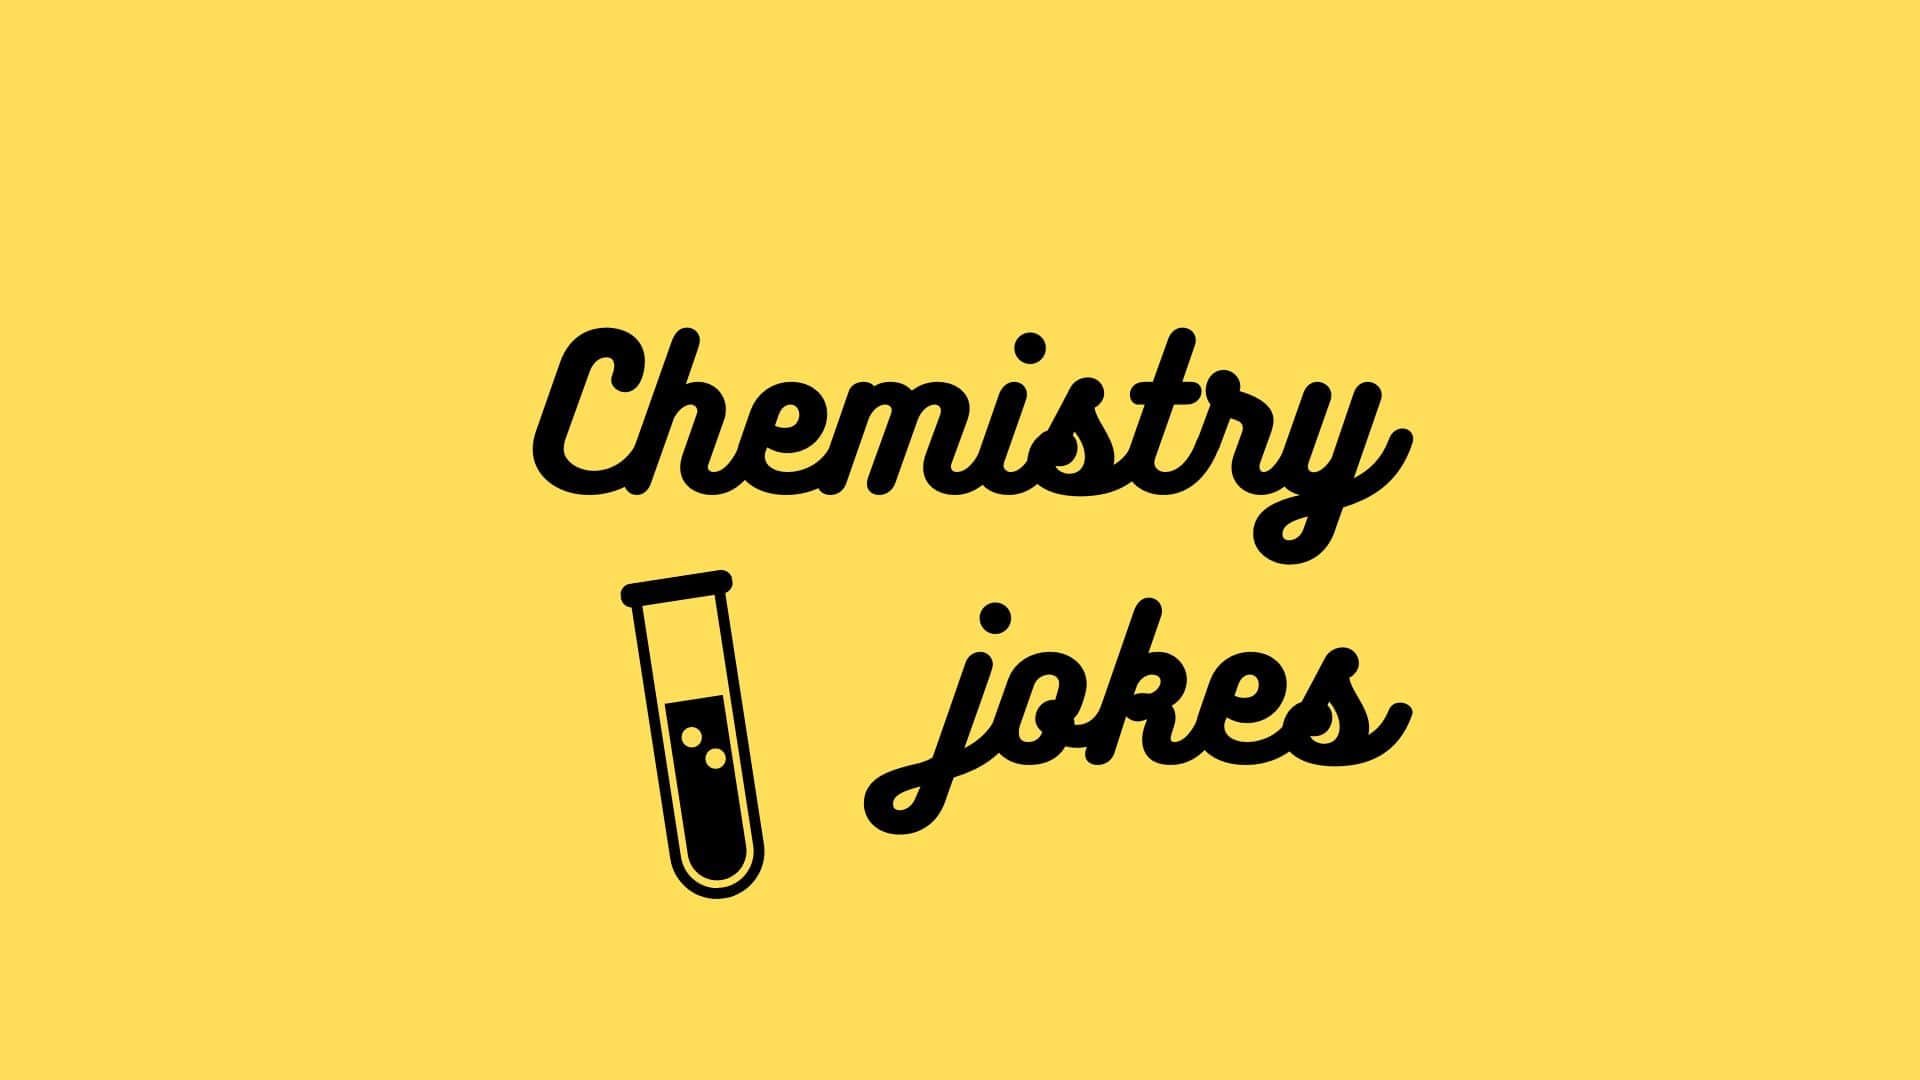 Top 50 Chemistry Jokes and Puns of all time